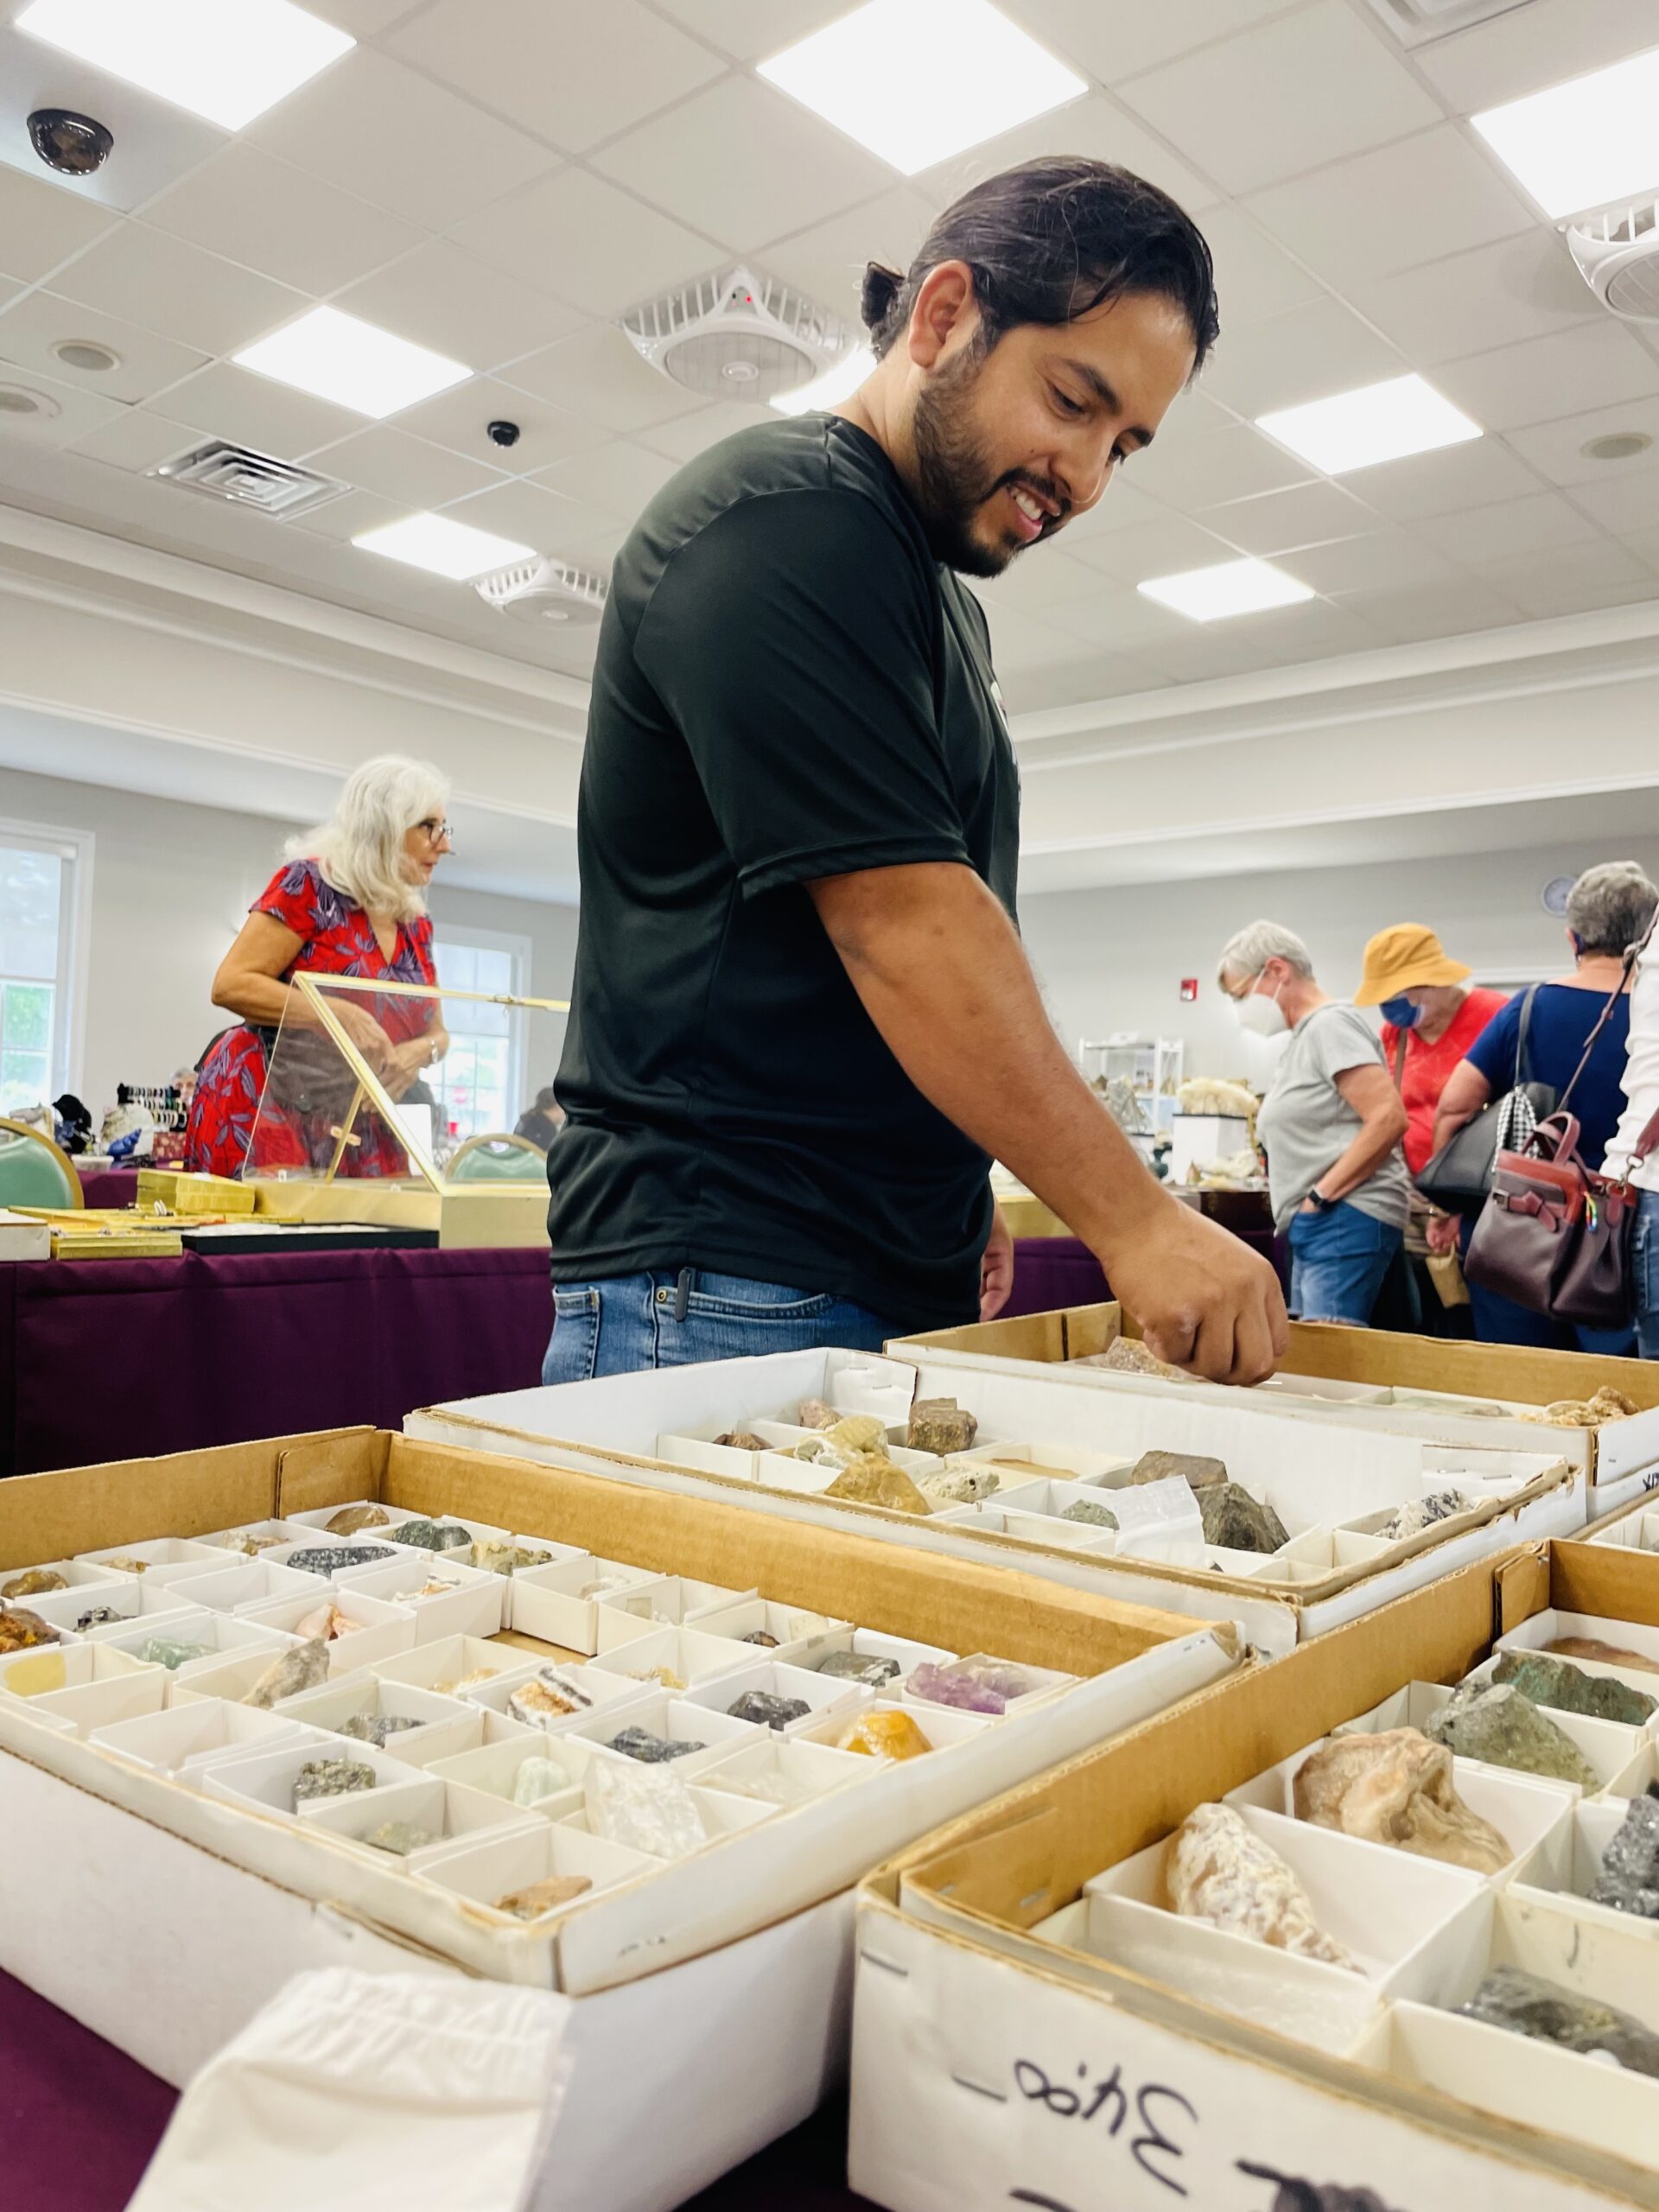 Vendors Wanted for Miami Gem & Mineral Show!